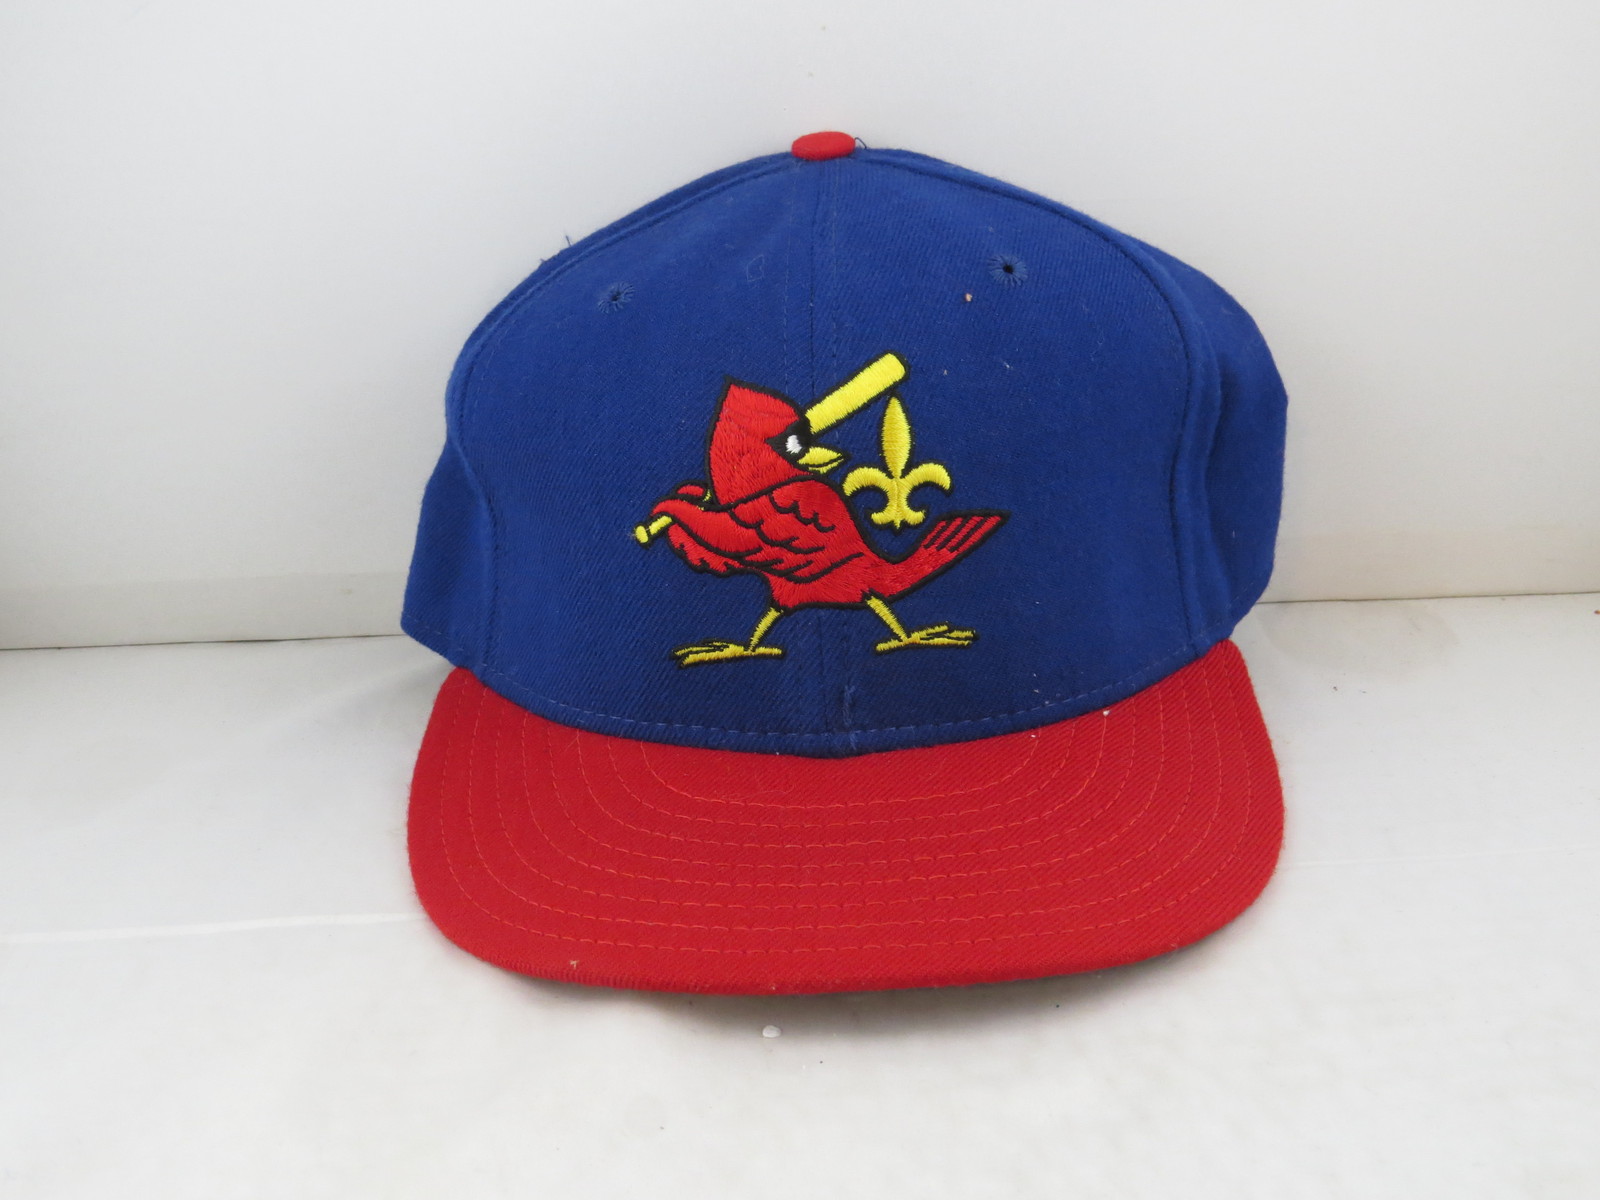 Vintage St. Louis Cardinals New Era Pro Fitted Baseball Hat, Size